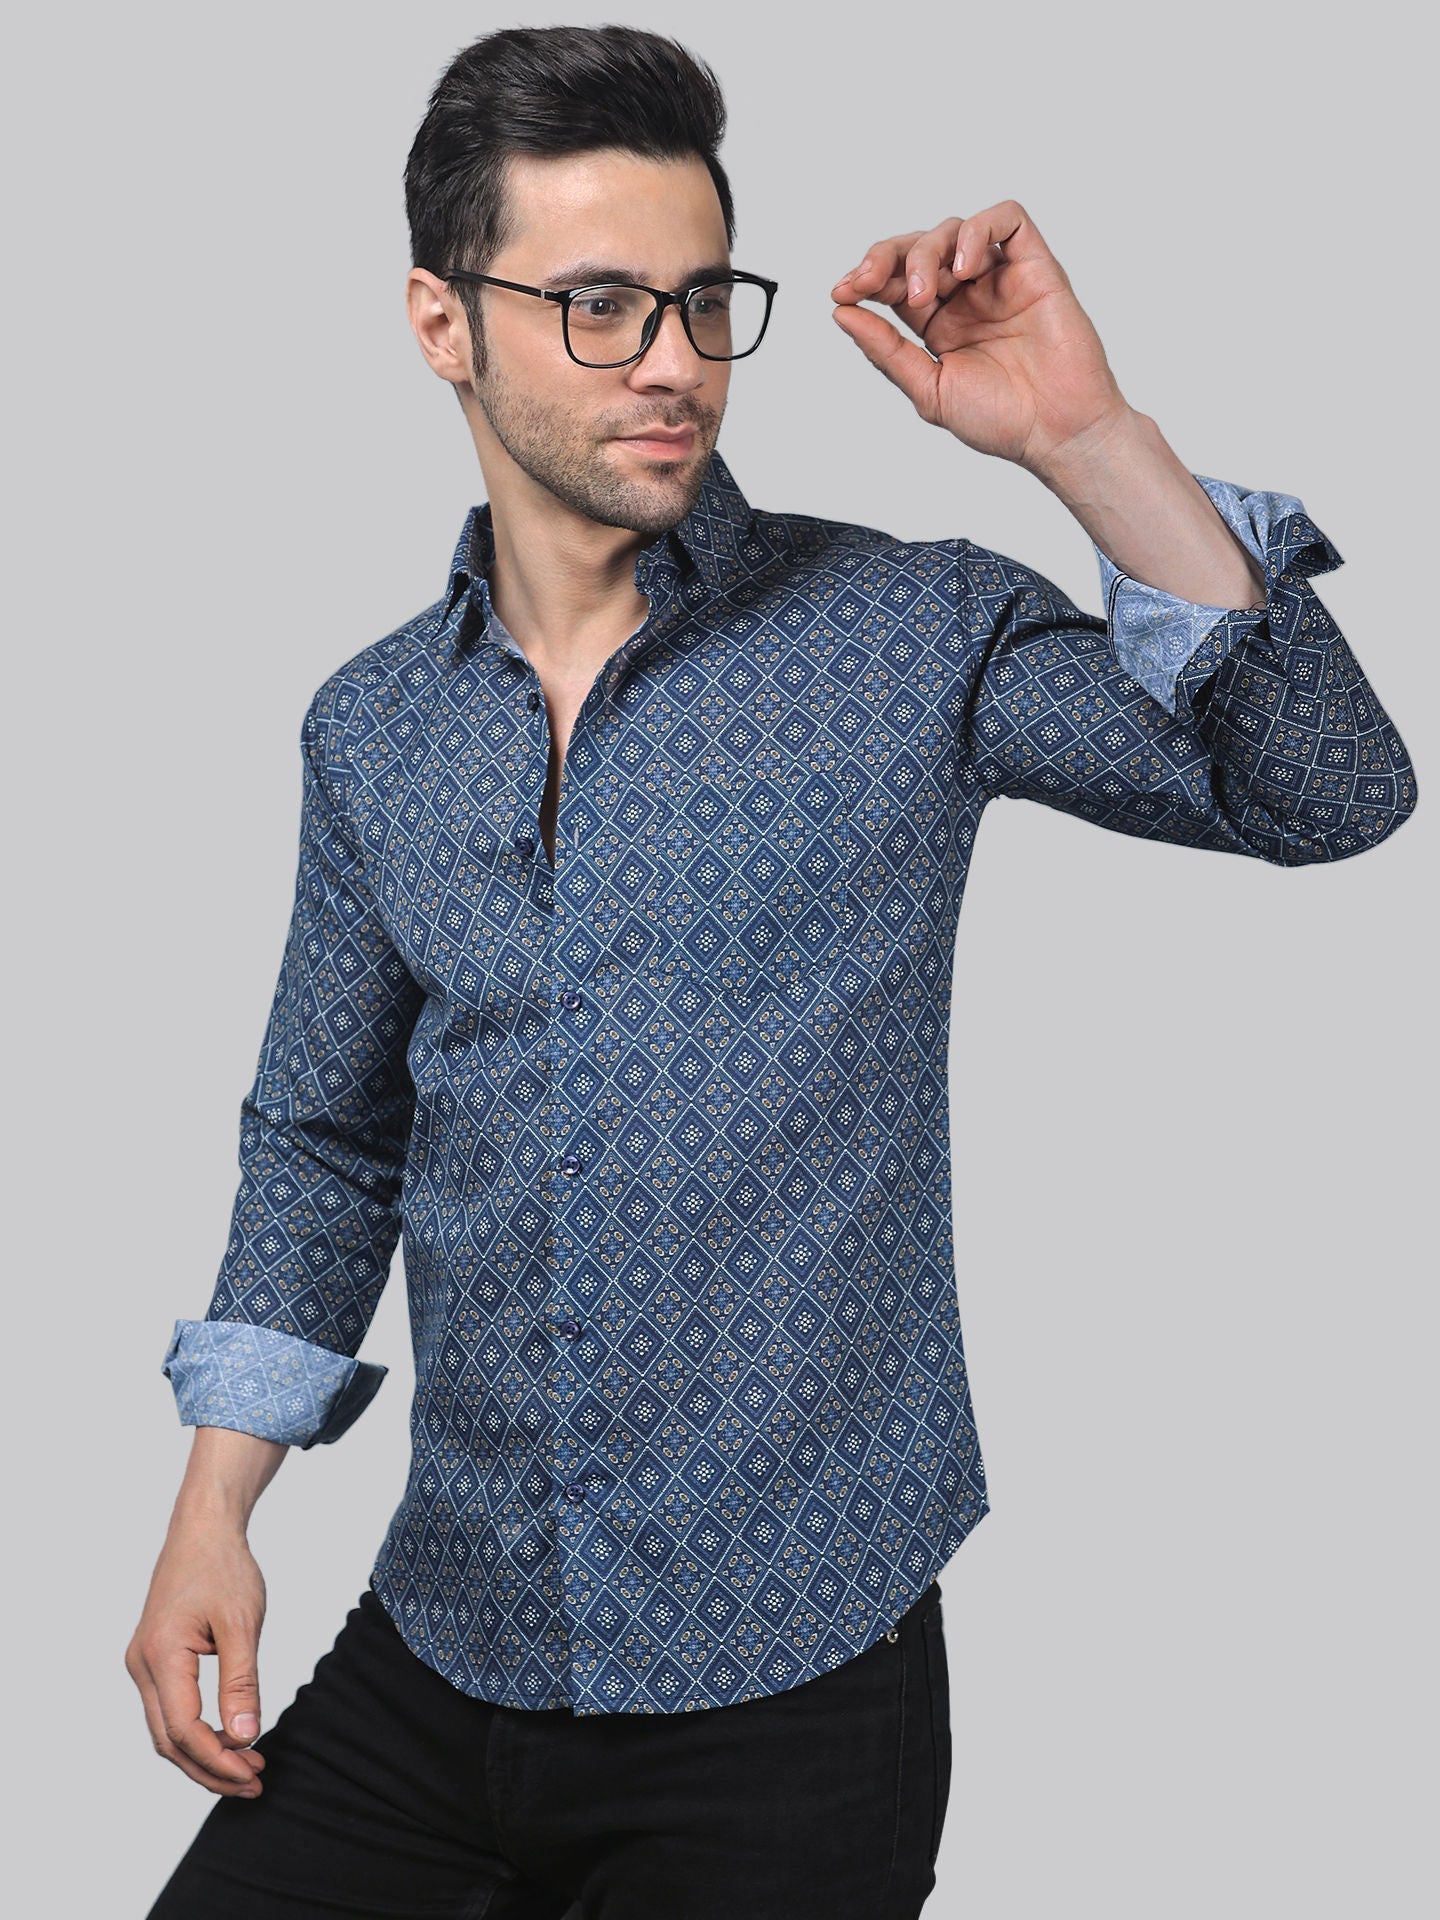 Arctic Men's Printed Full Sleeve Casual Linen Shirt - TryBuy® USA🇺🇸